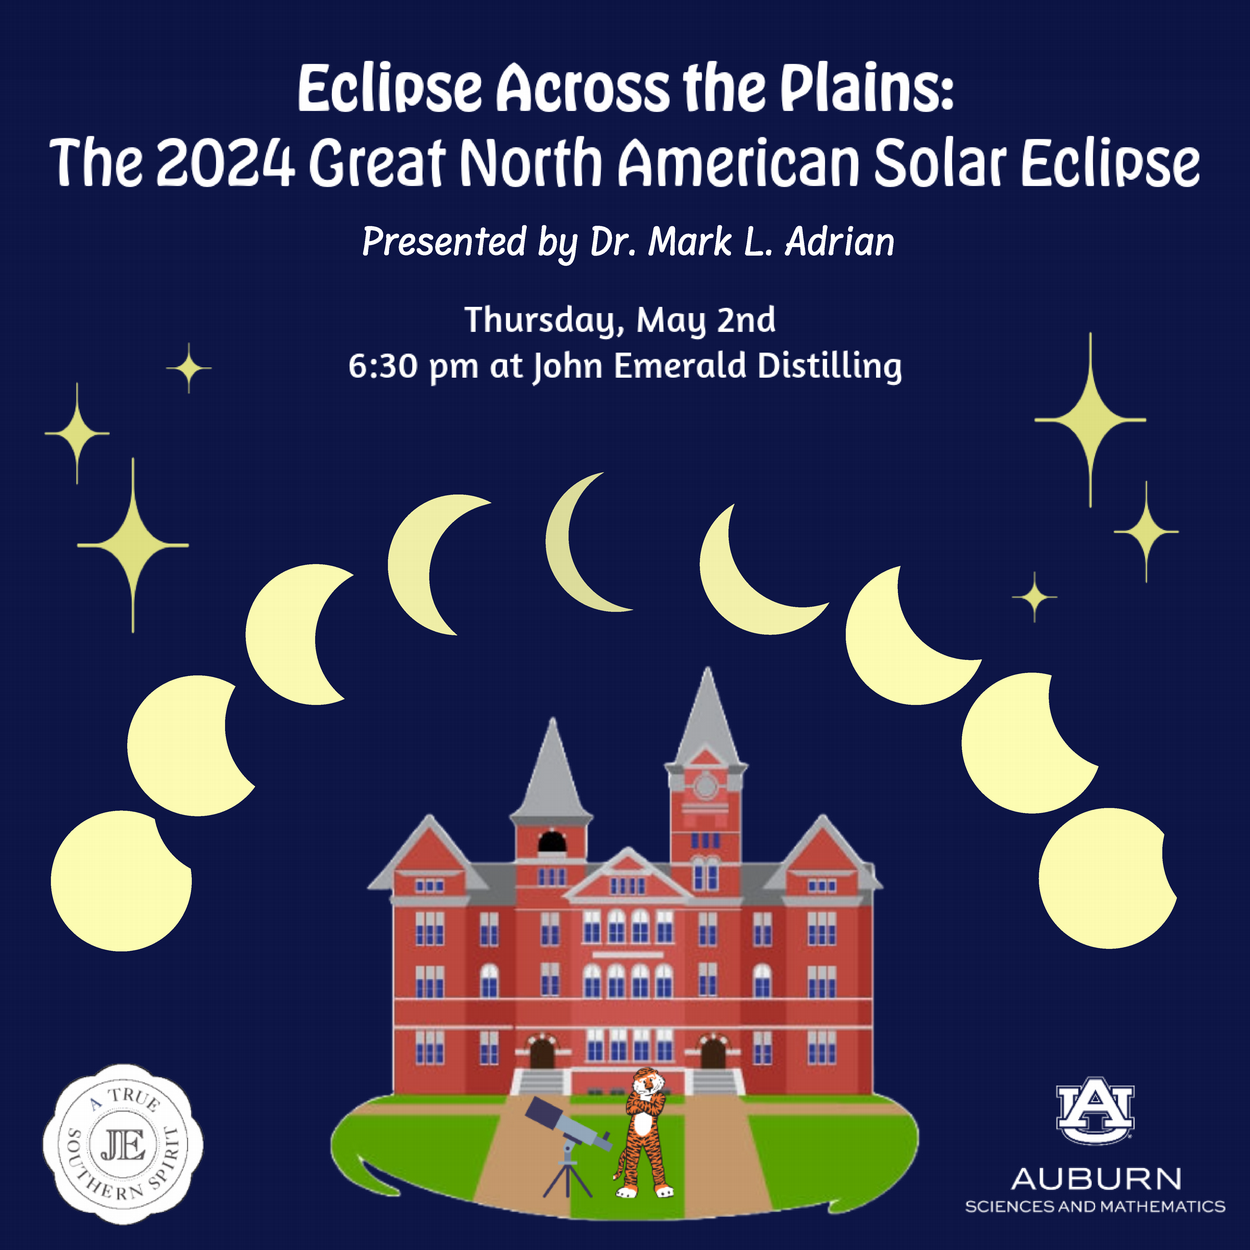 Joins us for the Eclipse Across the Plains - Science Café on May 2 at 6:30 p.m.